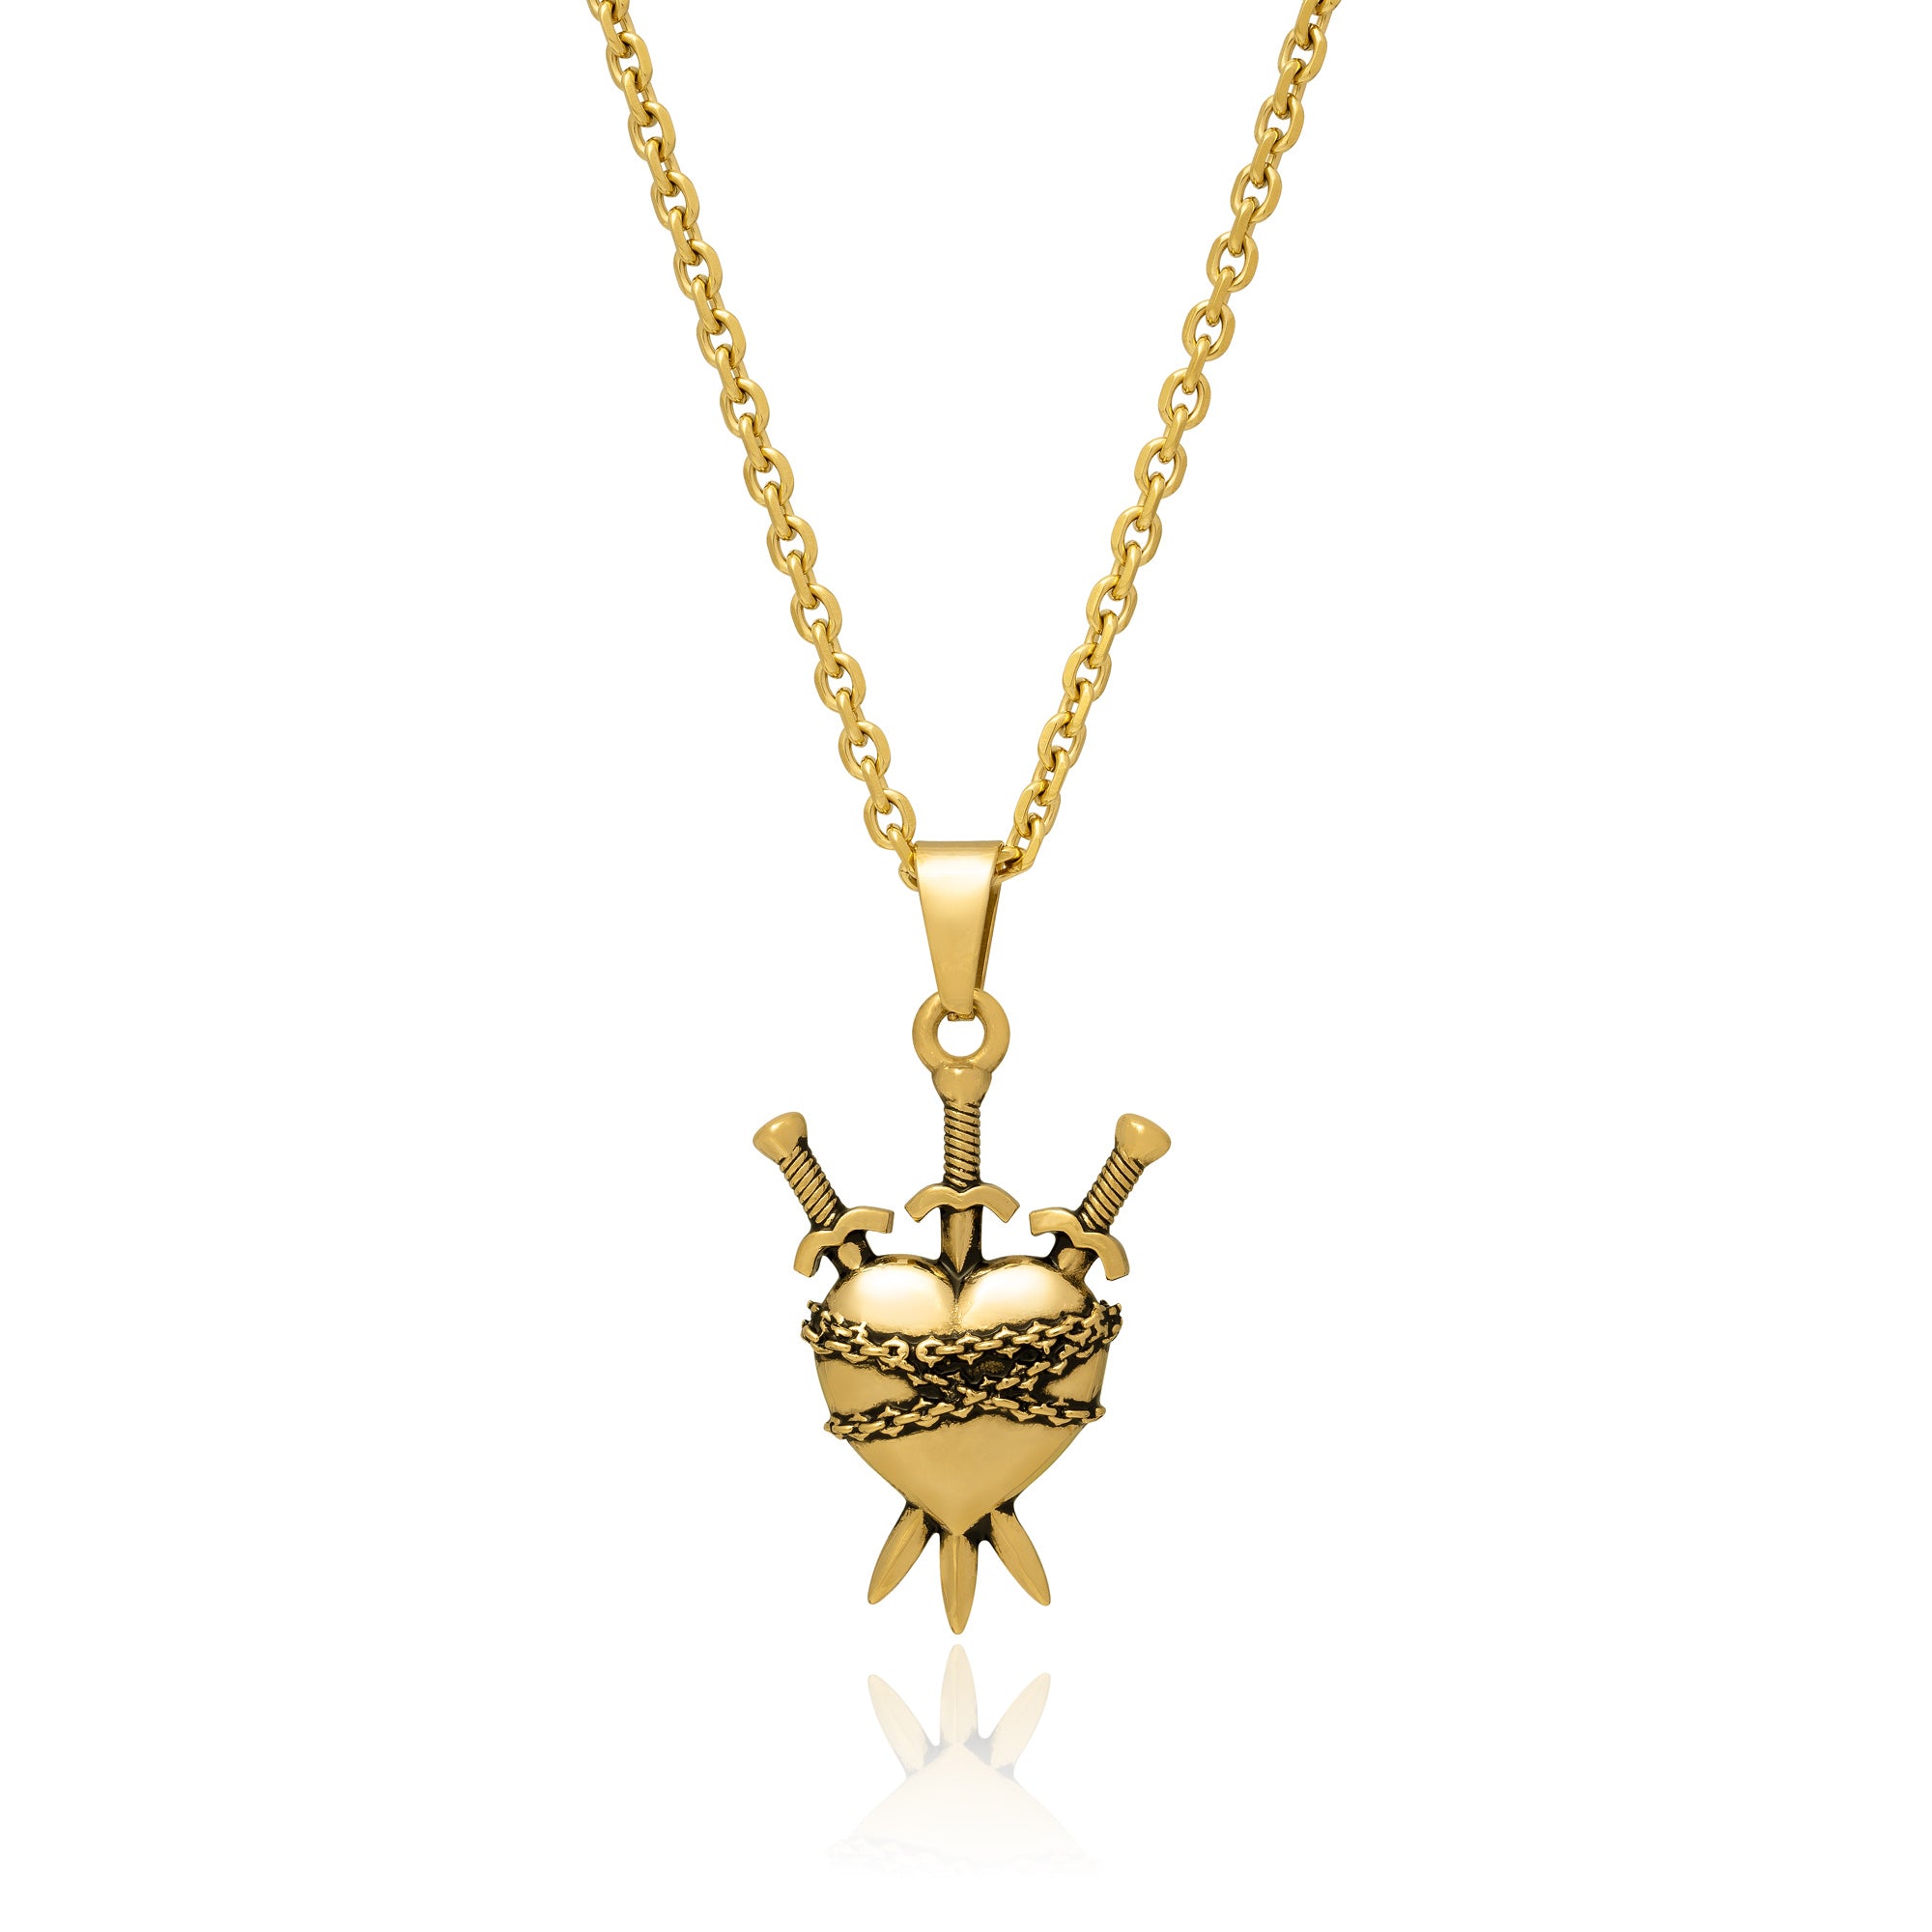 Sword heart charm necklace chain in gold